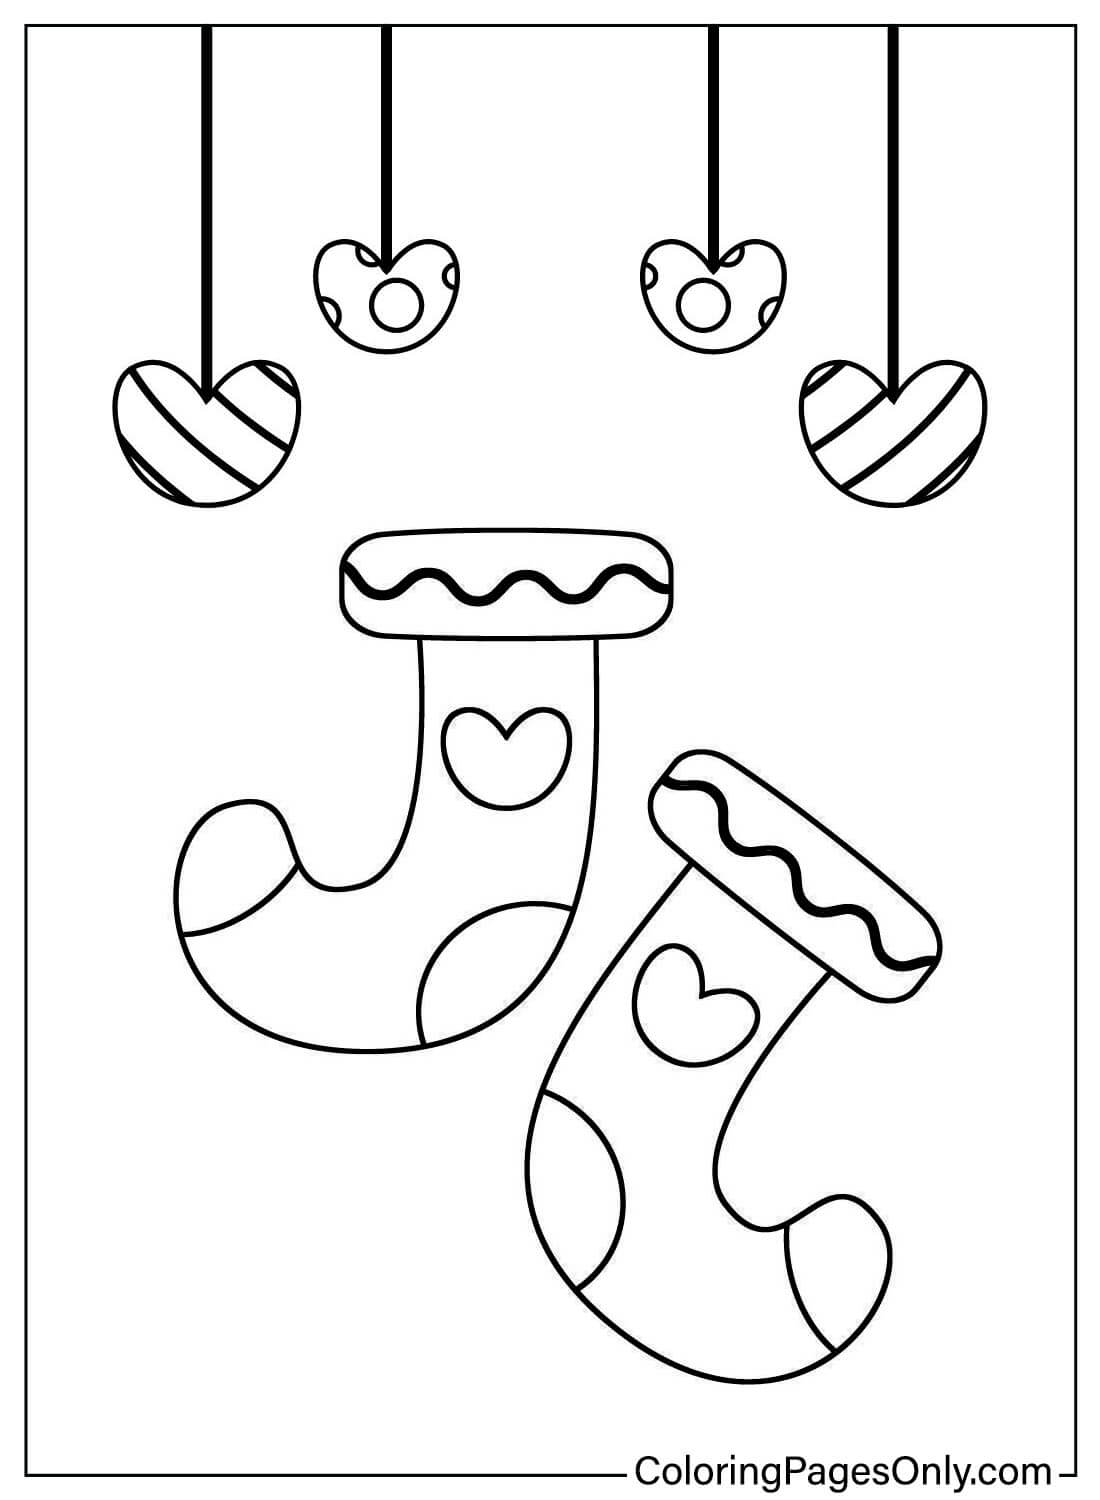 Socks Coloring Book - Free Printable Coloring Pages